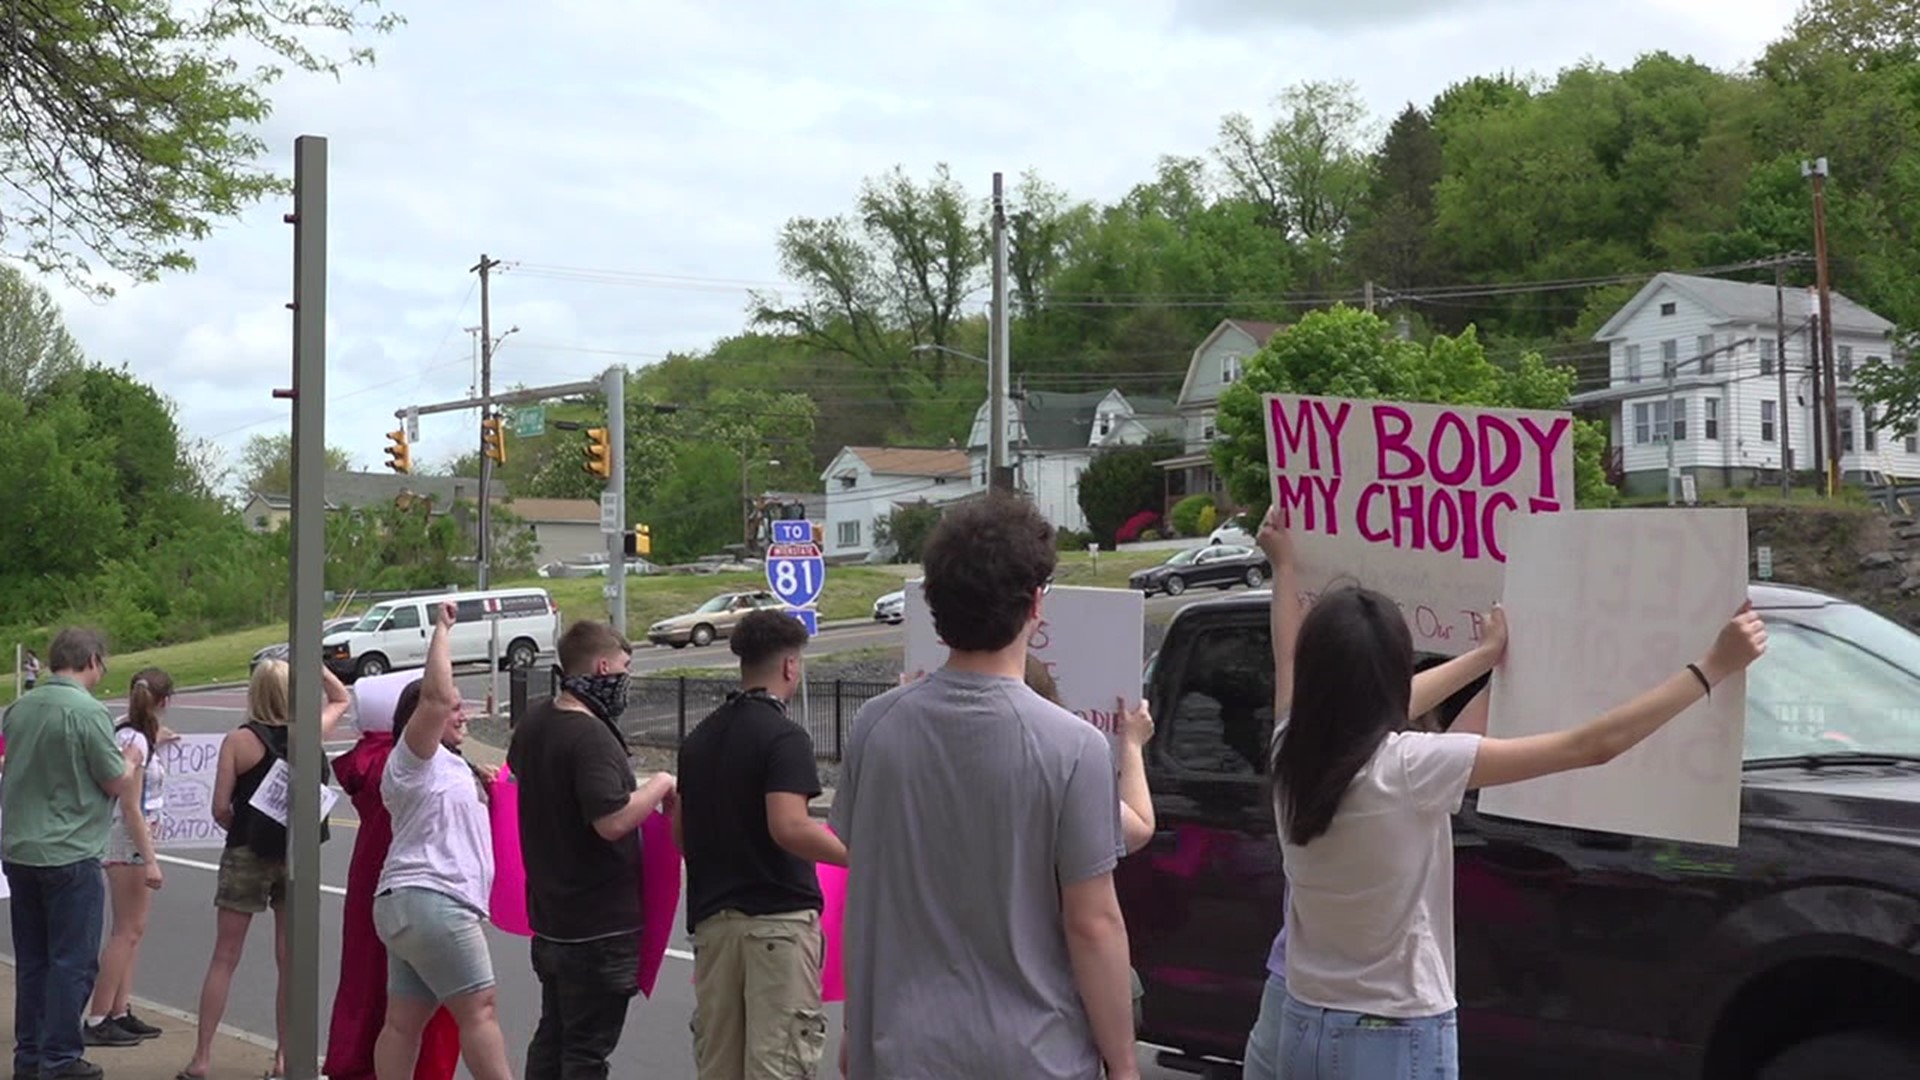 The battle over abortion rights reached our area; those supporting a woman's right to choose took to the streets.